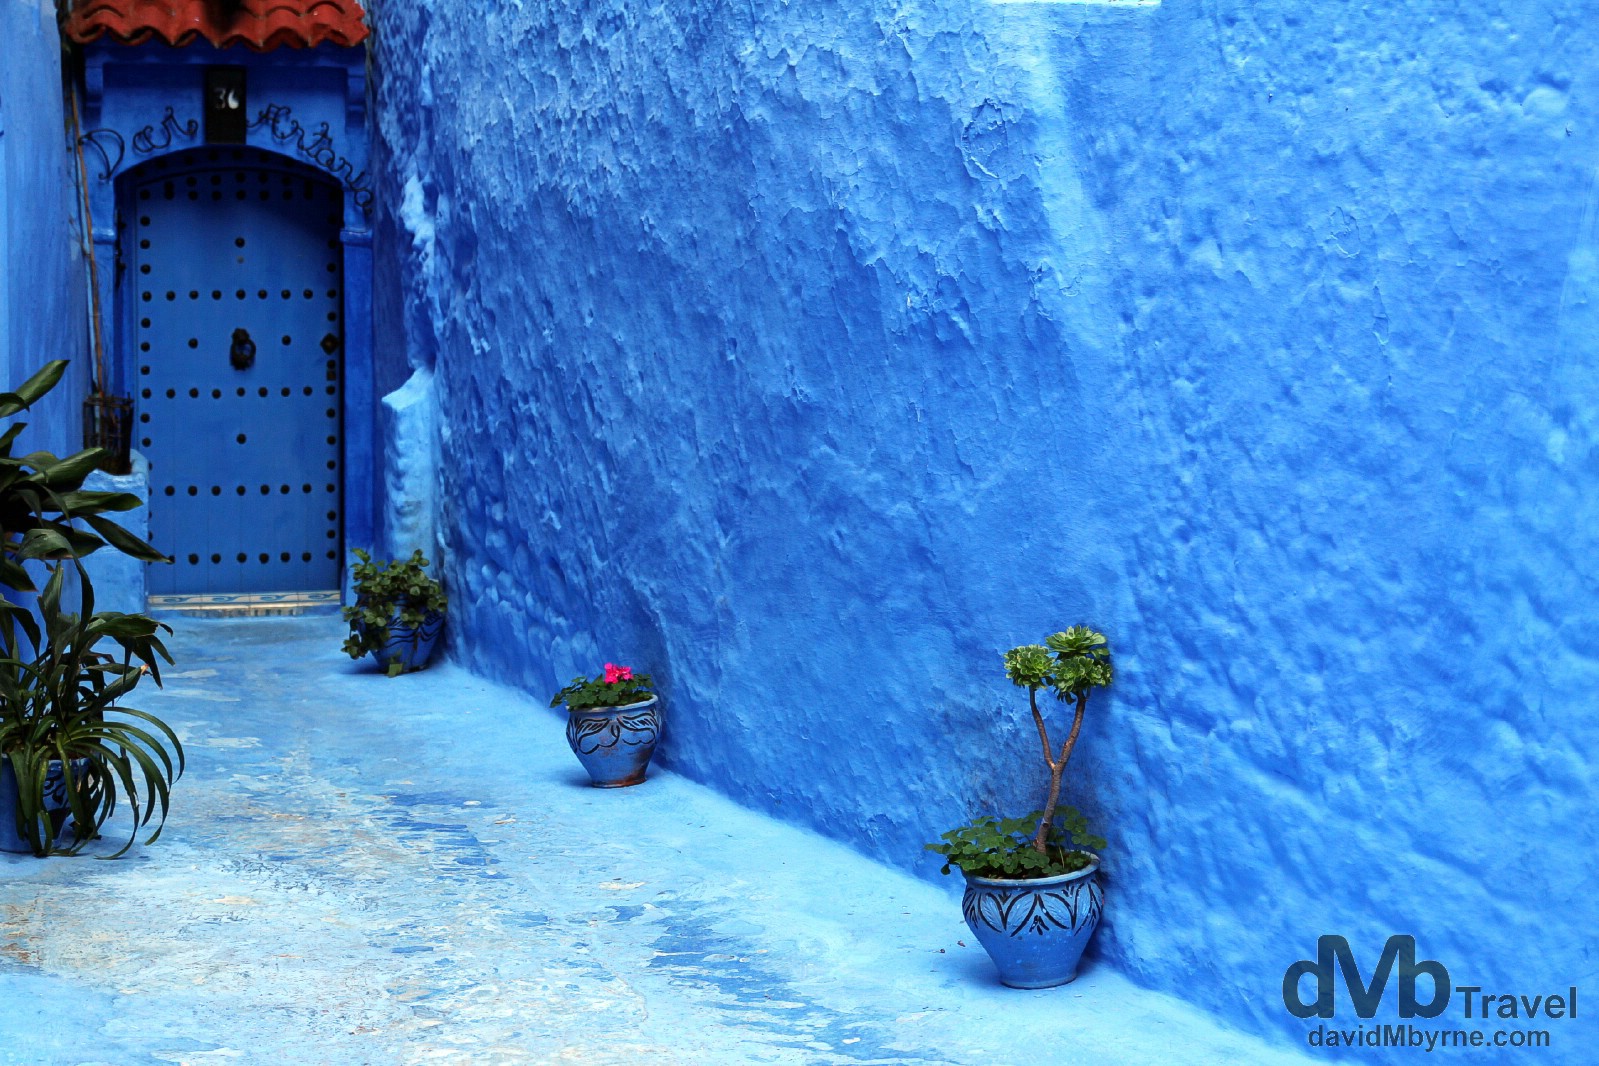 The lane to the Dar Antonio guest house in the medina in Chefchaouen, Morocco. June 1st, 2014.